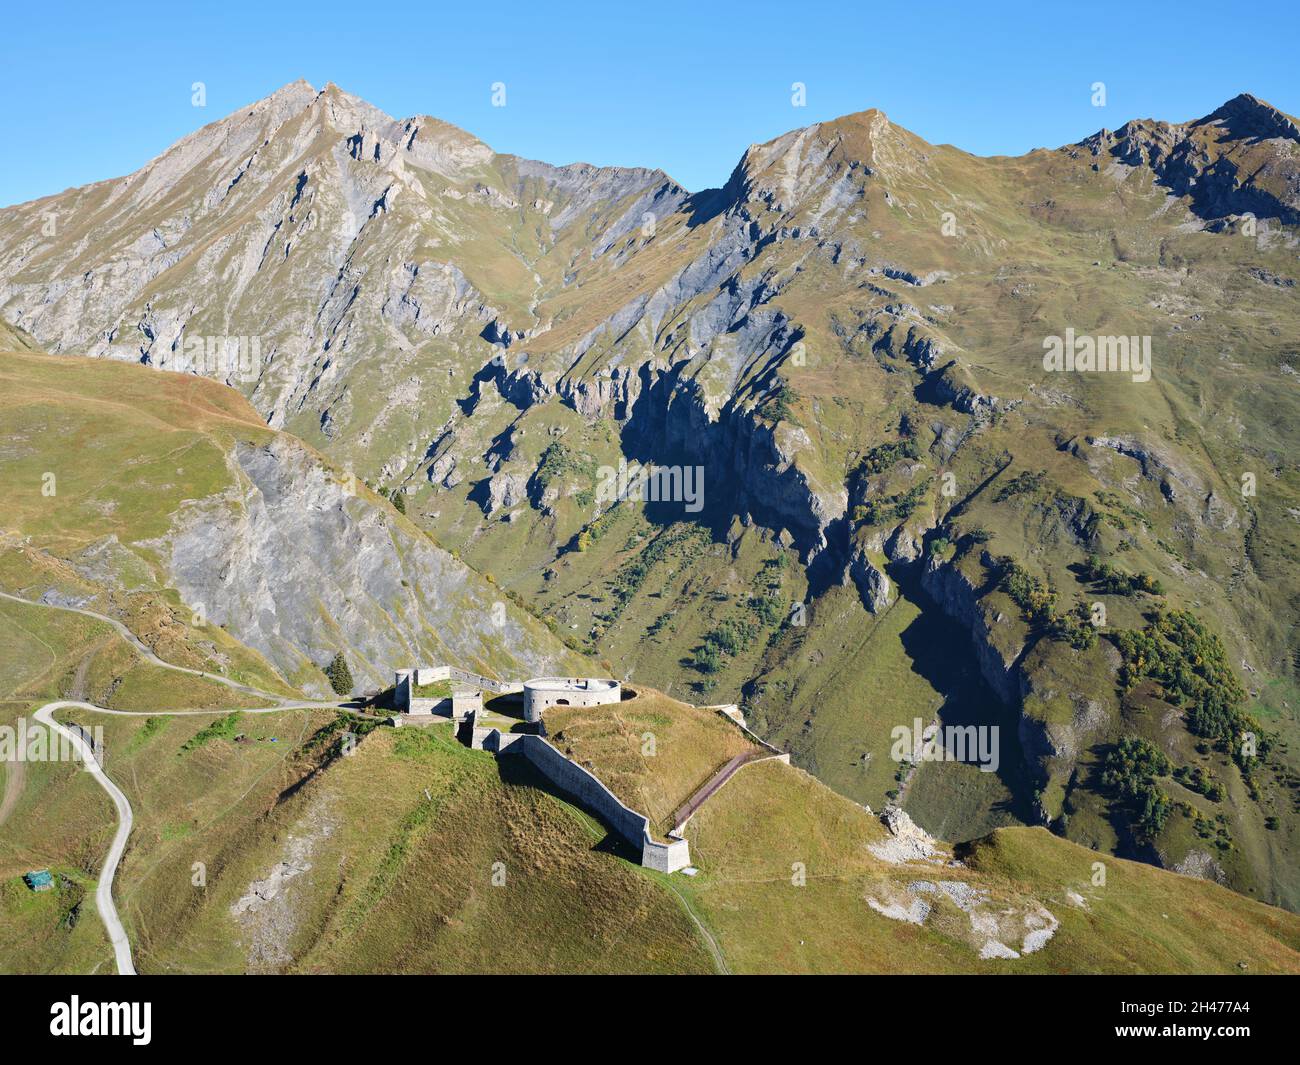 AERIAL VIEW. Military fortification from the late 1800s at an altitude of 2000m in the Tarentaise Valley. Fort de la Platte, Bourg-St-Maurice, France. Stock Photo